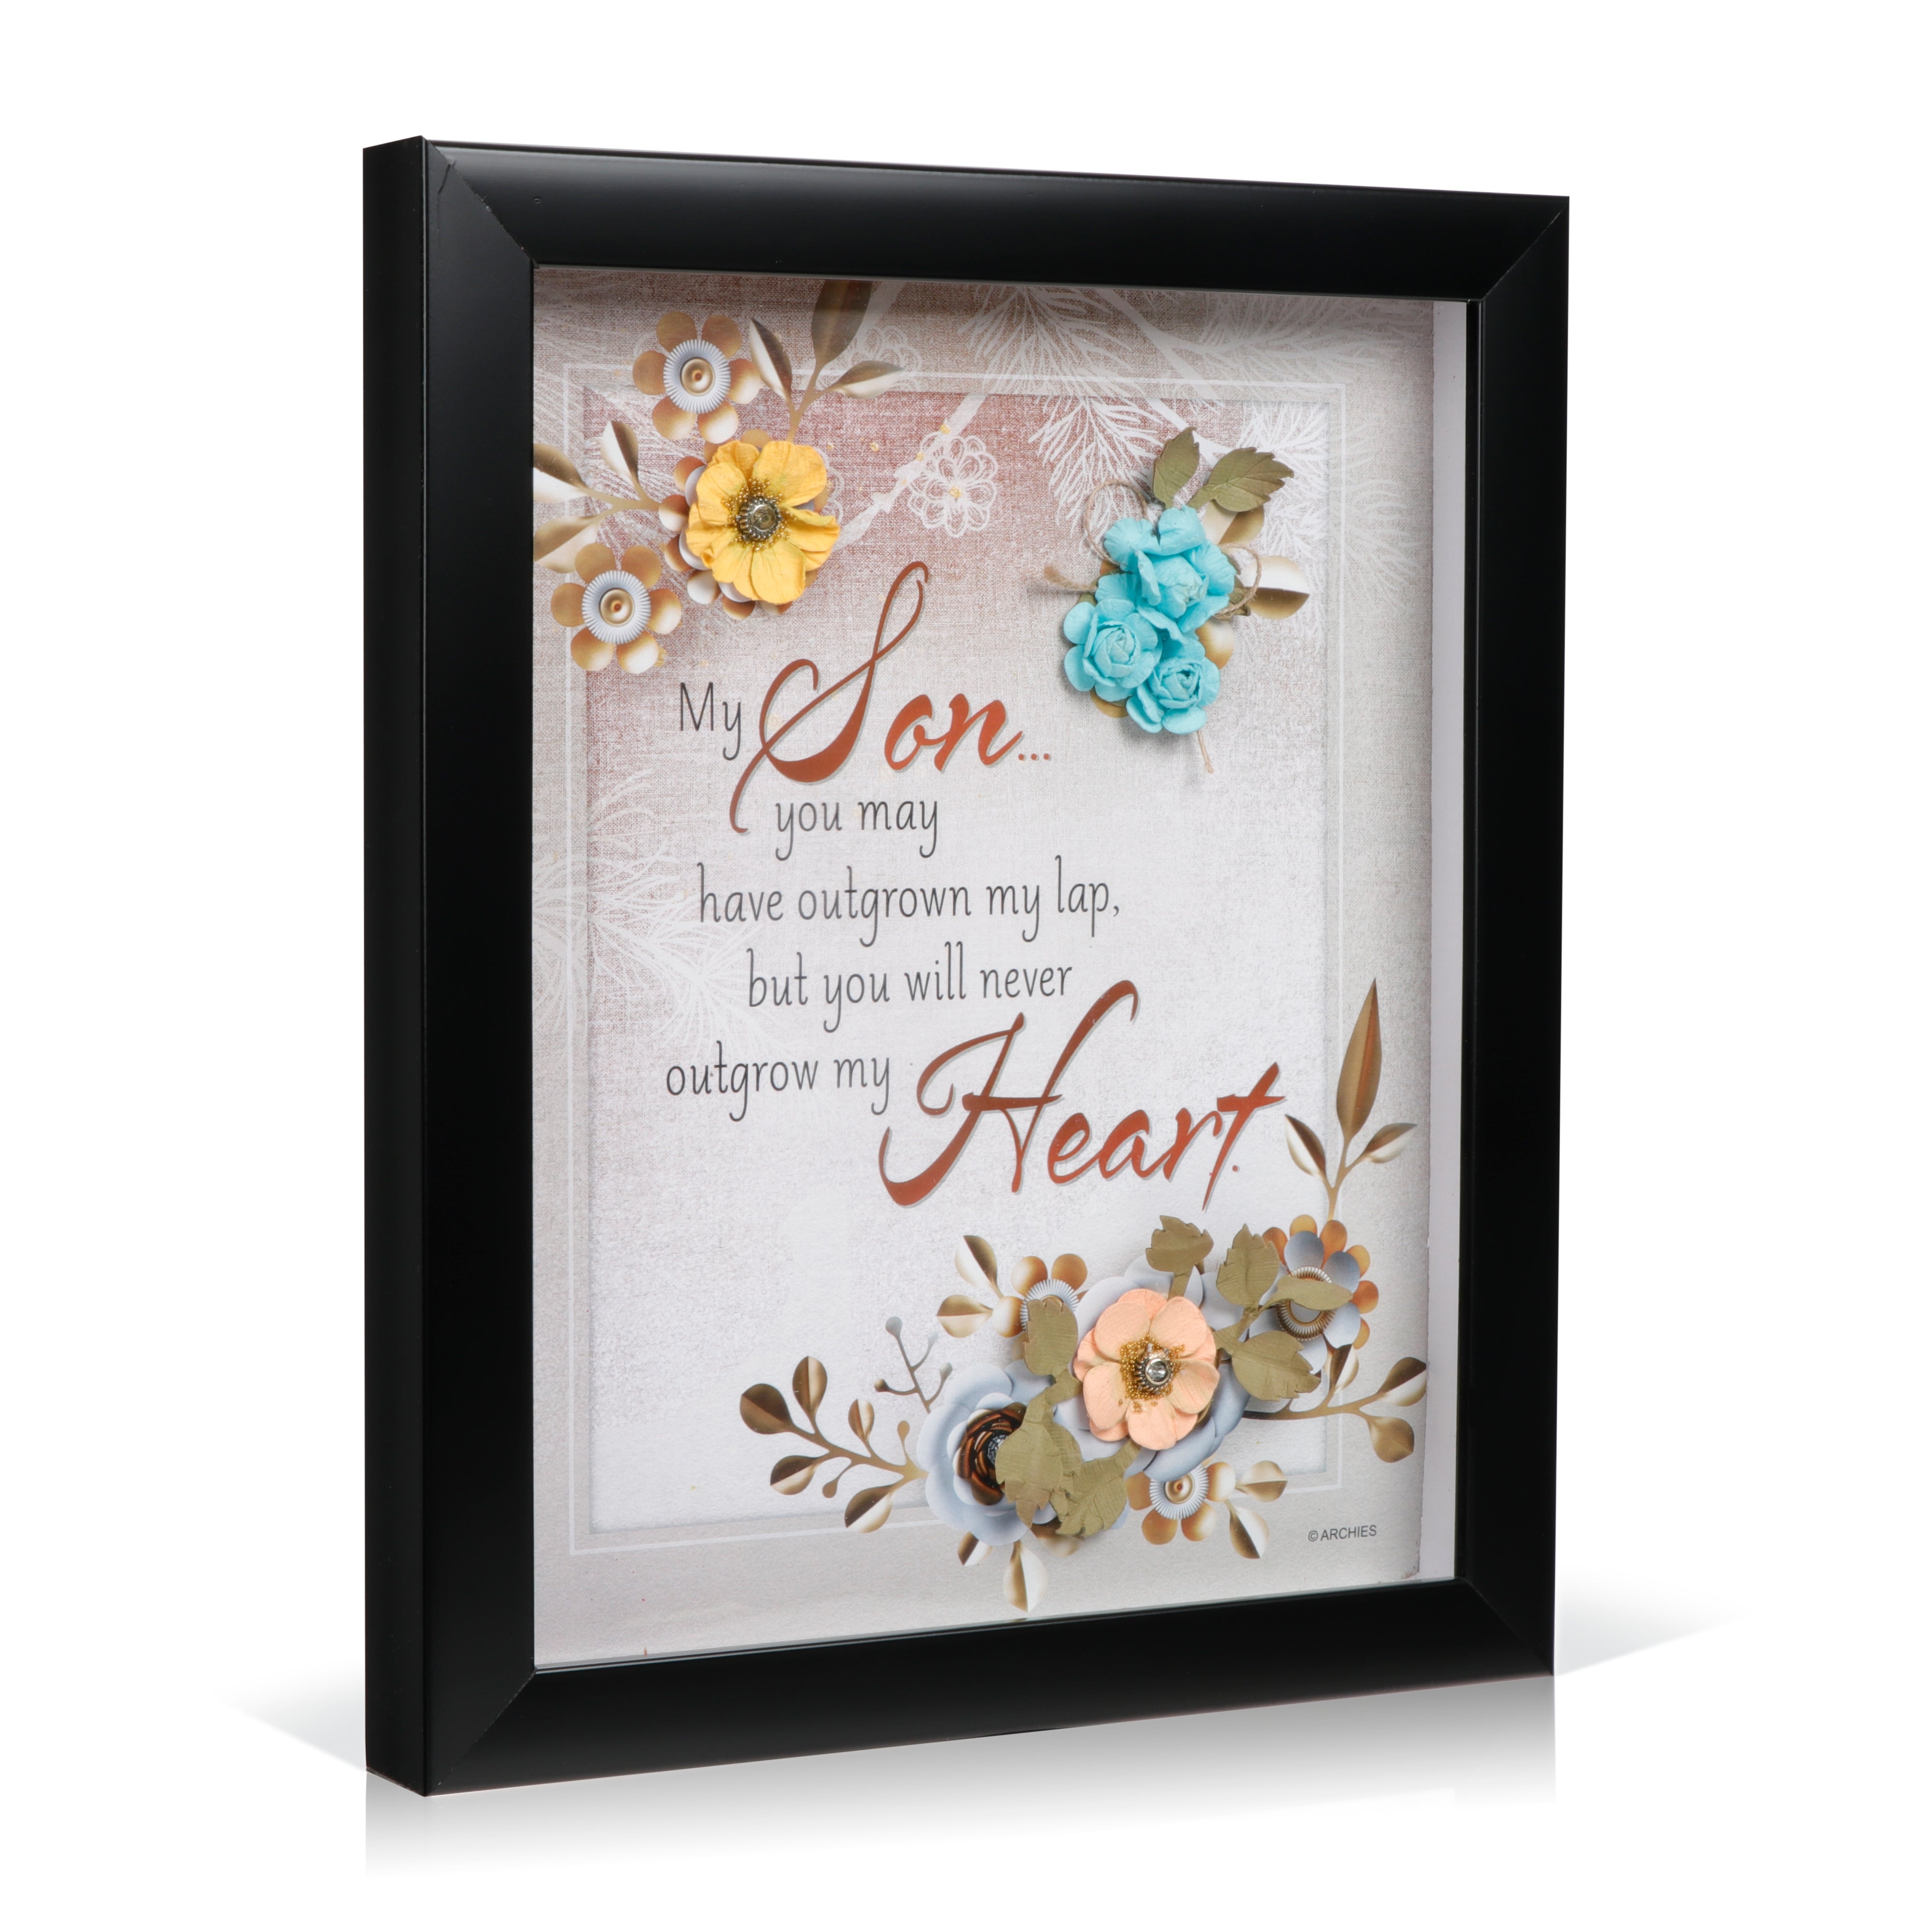 Archies KEEPSAKE QUOTATION - MY SON YOU MAY.... For gifting and Home décor